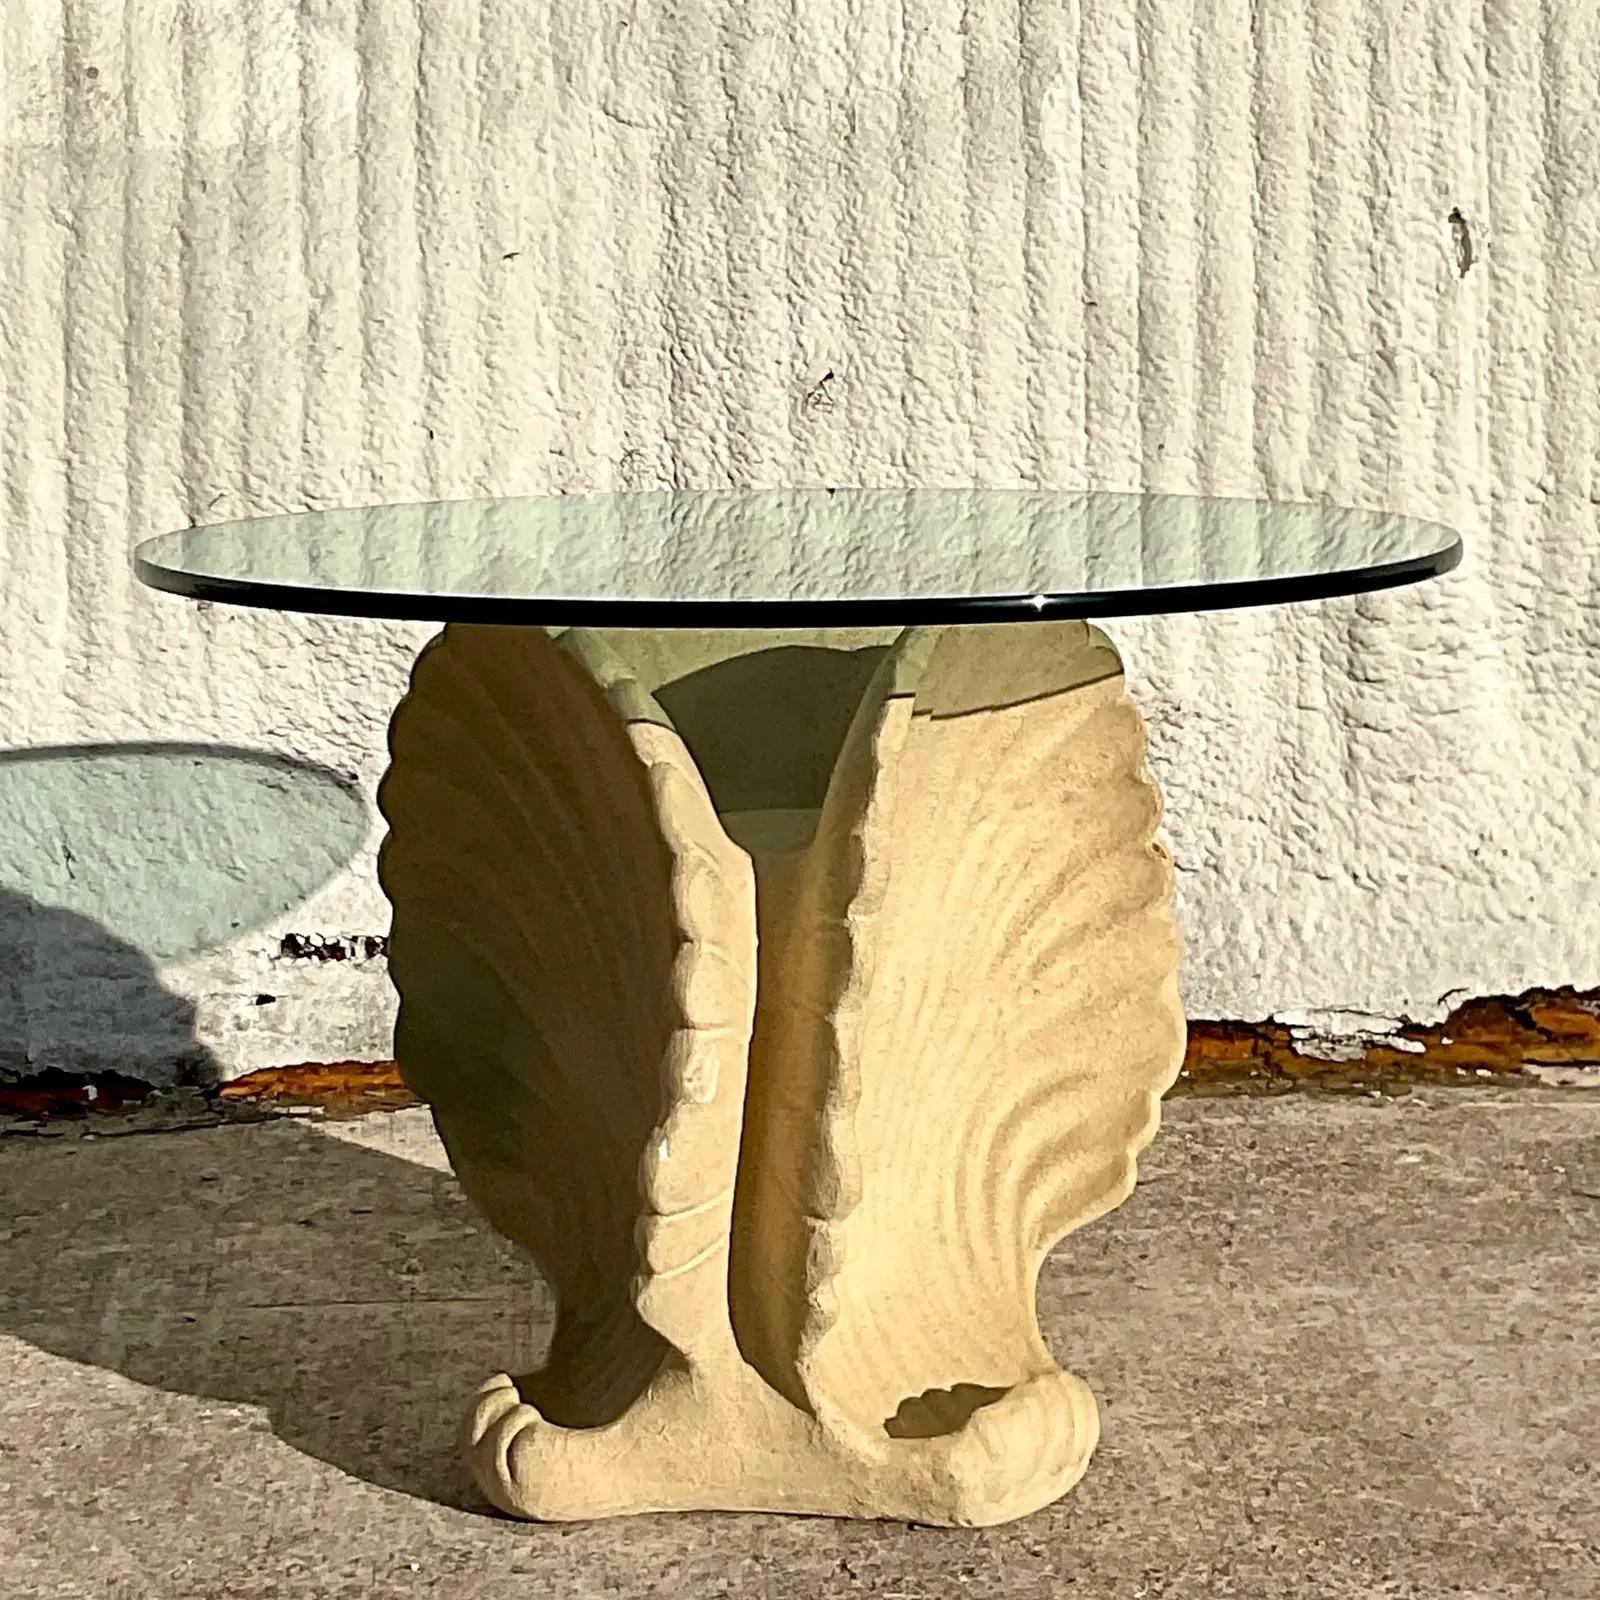 A fabulous vintage Coastal Plaster dining table. Beautiful triple clamshell design with a thick glass top. Perfect as a small dining table or a gorgeous entry hall table. You decide! Acquired from a Palm Beach estate.